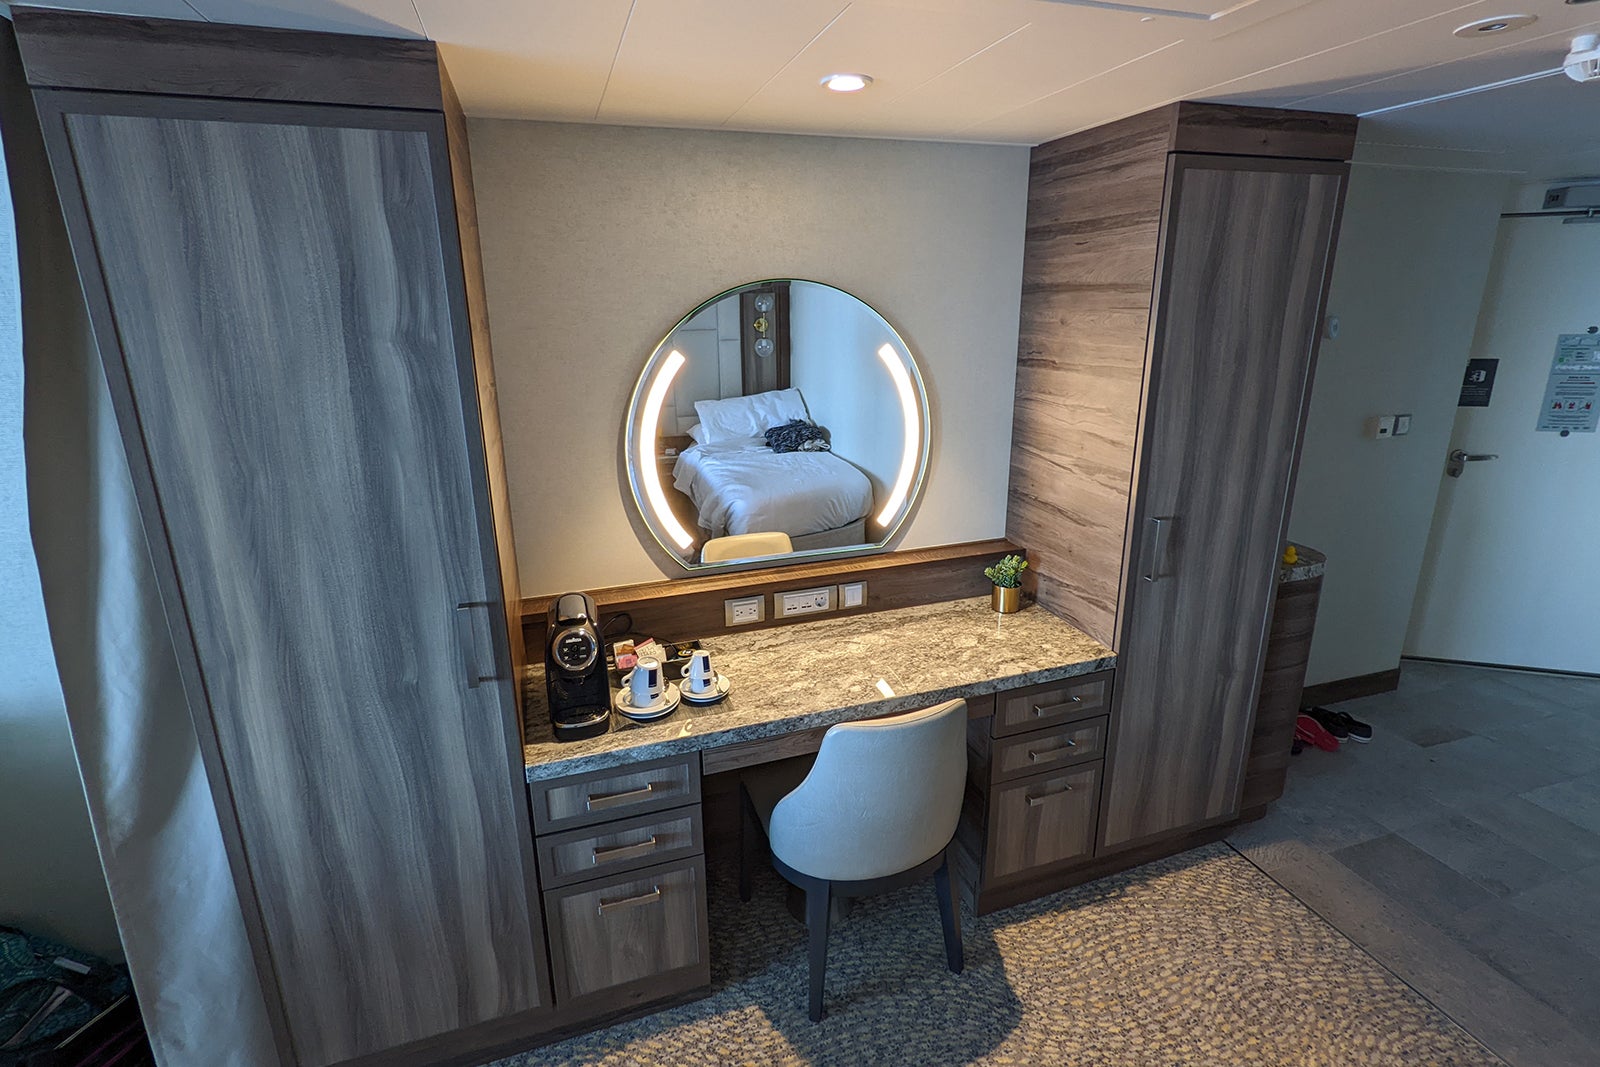 do celebrity cruise ships have shampoo and conditioner